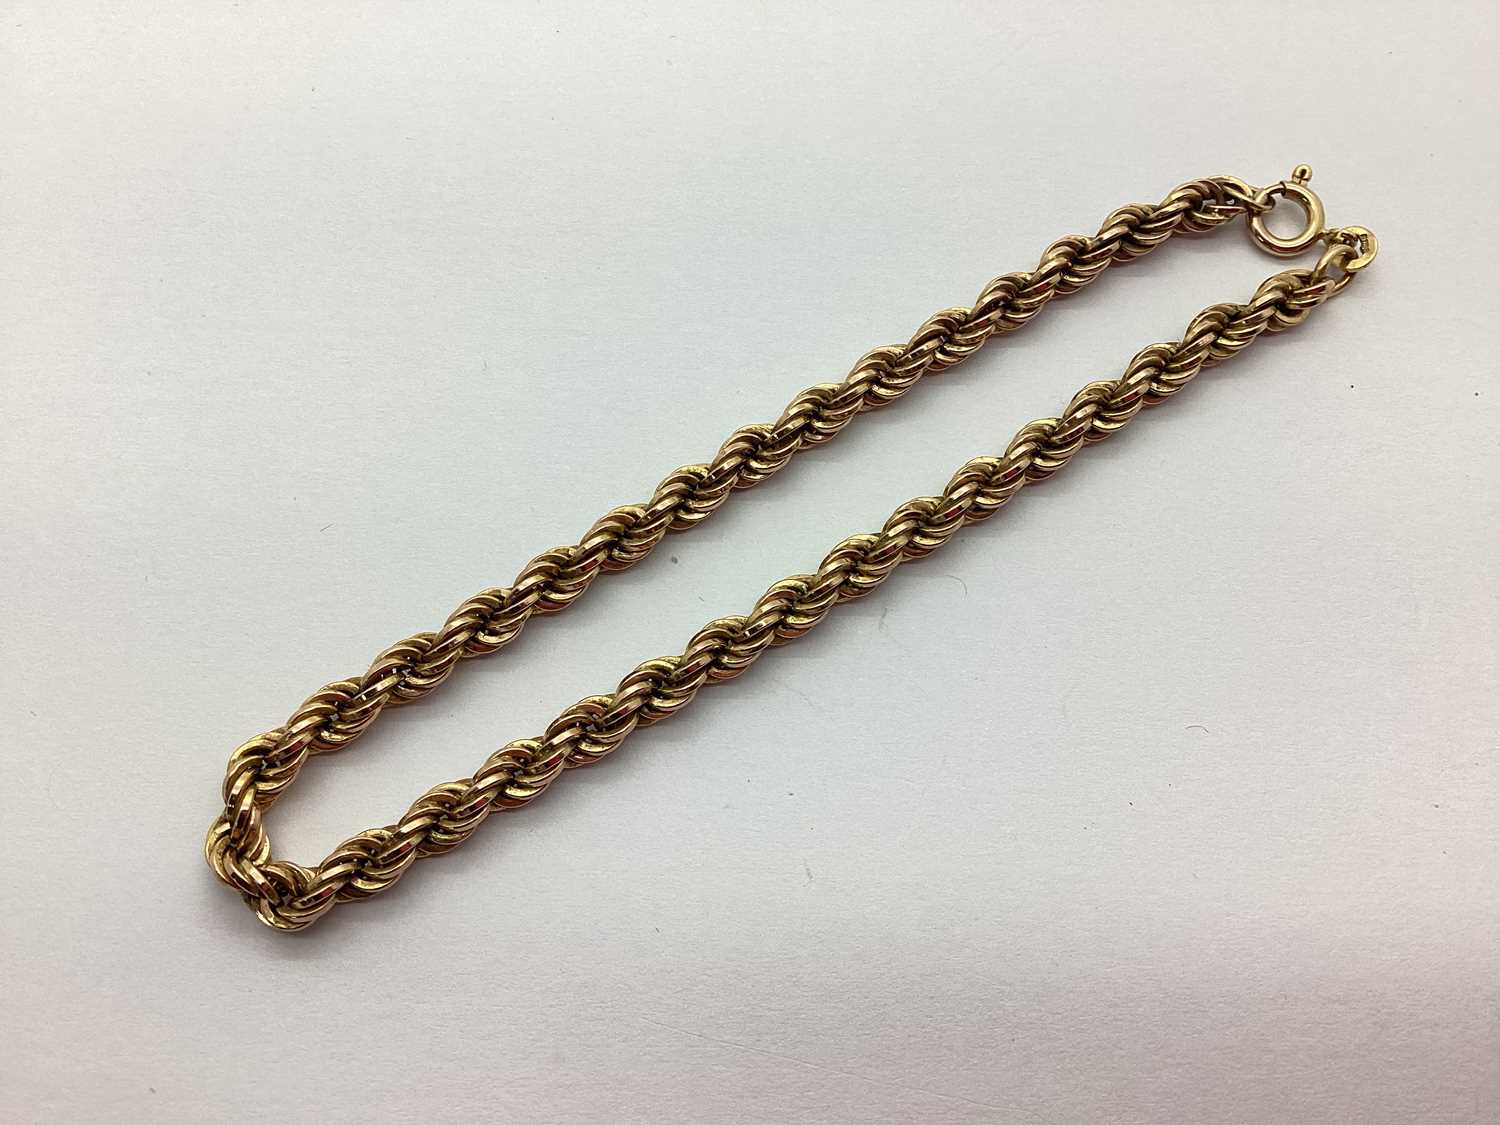 A 9ct Gold Ropetwist Chain Bracelet, (unsoldered clasp stamped "9kt") (6.7grams).